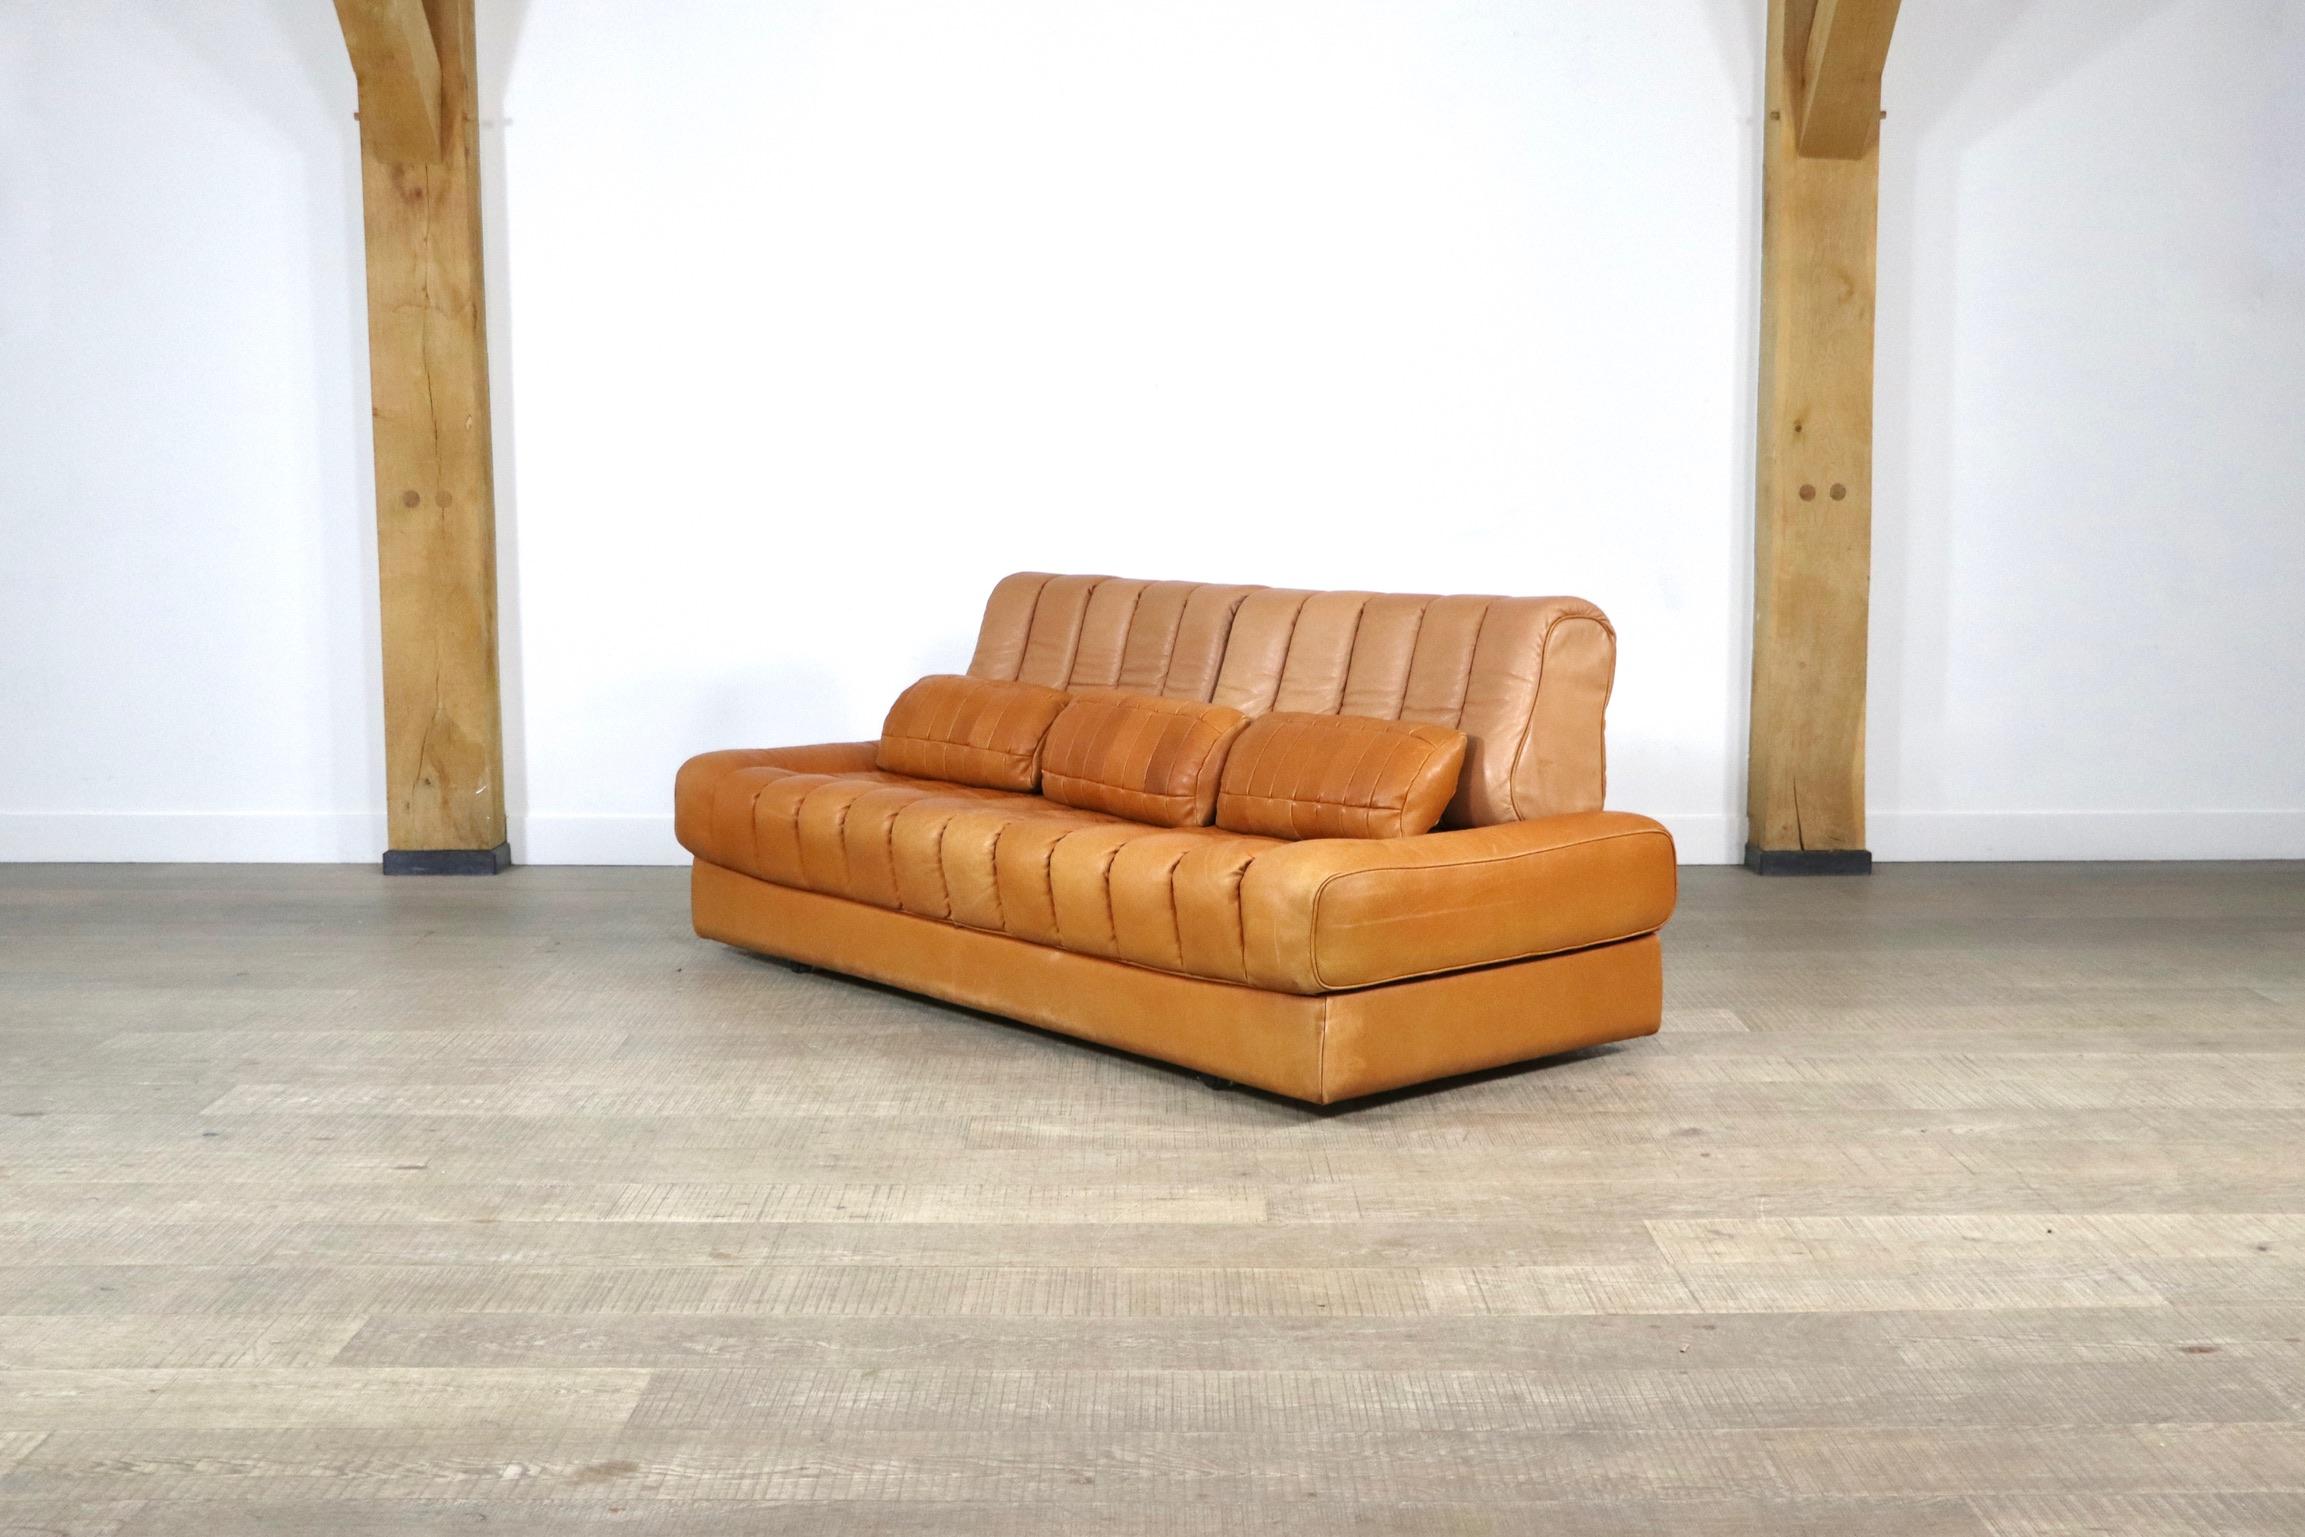 Stunning De Sede DS-85 sofa/daybed in cognac leather. This sofa is a special edition, which can be recognised through the lighter coloured back cushions. The sofa can be folded into a large double bed, which makes it the ideal sofa for a small space